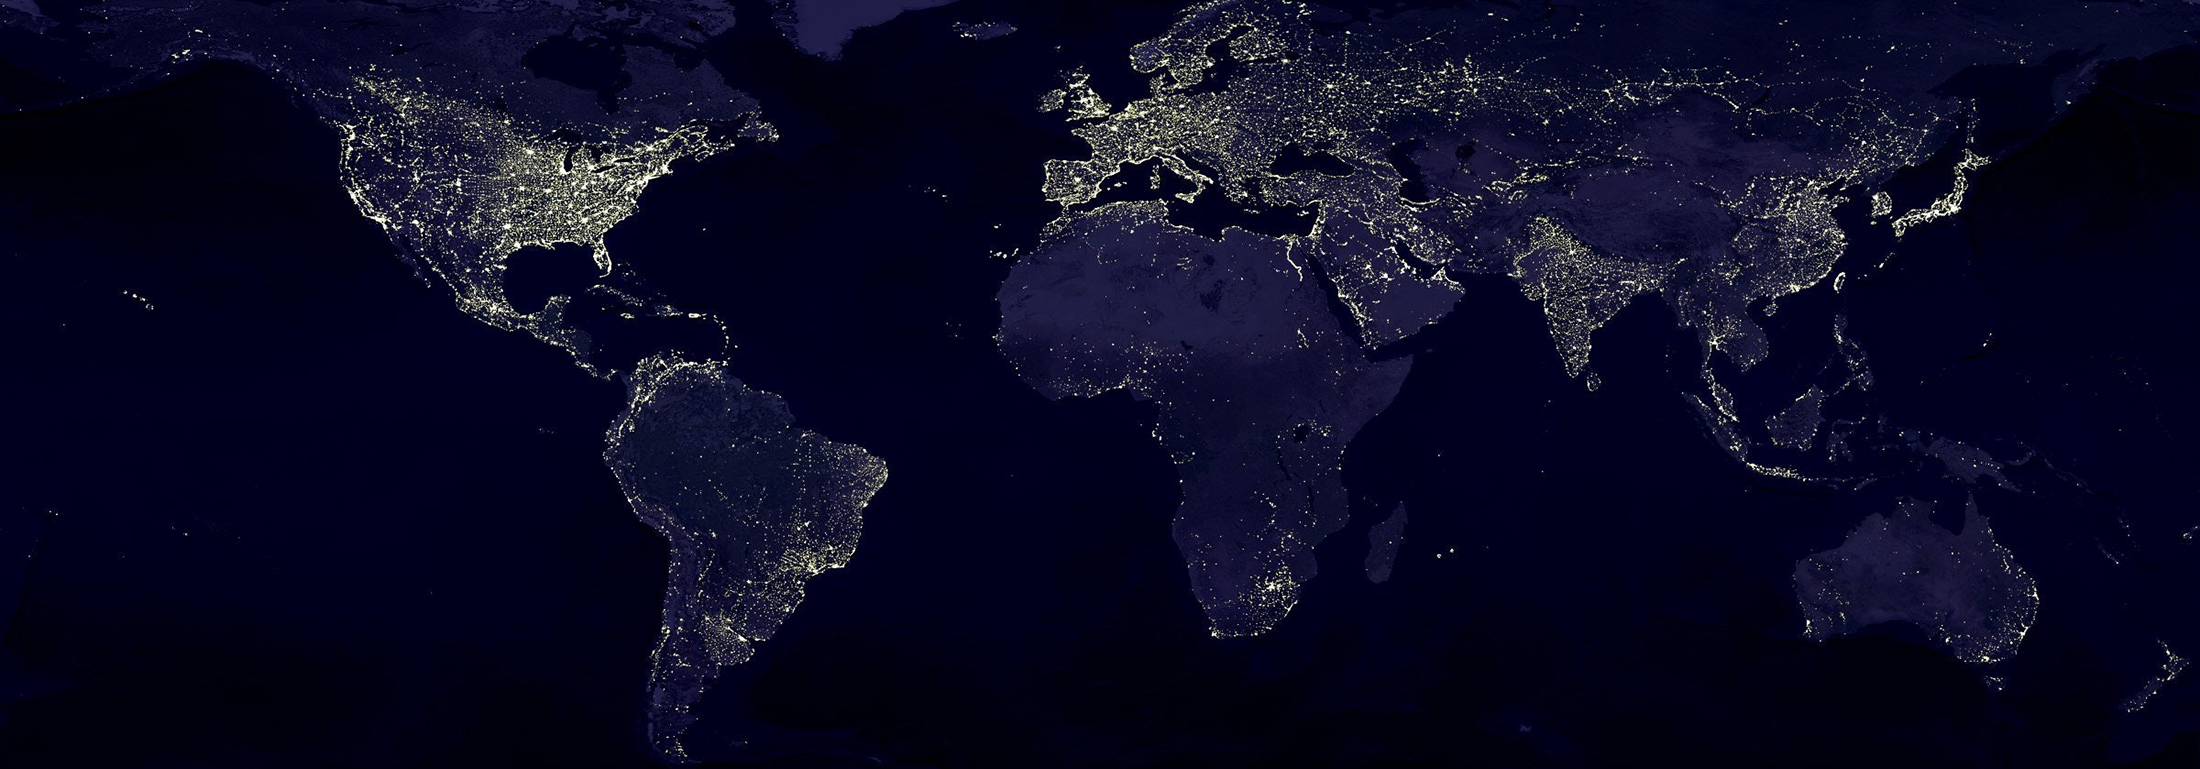 Map of the world as it might seem at night with city lights glowing